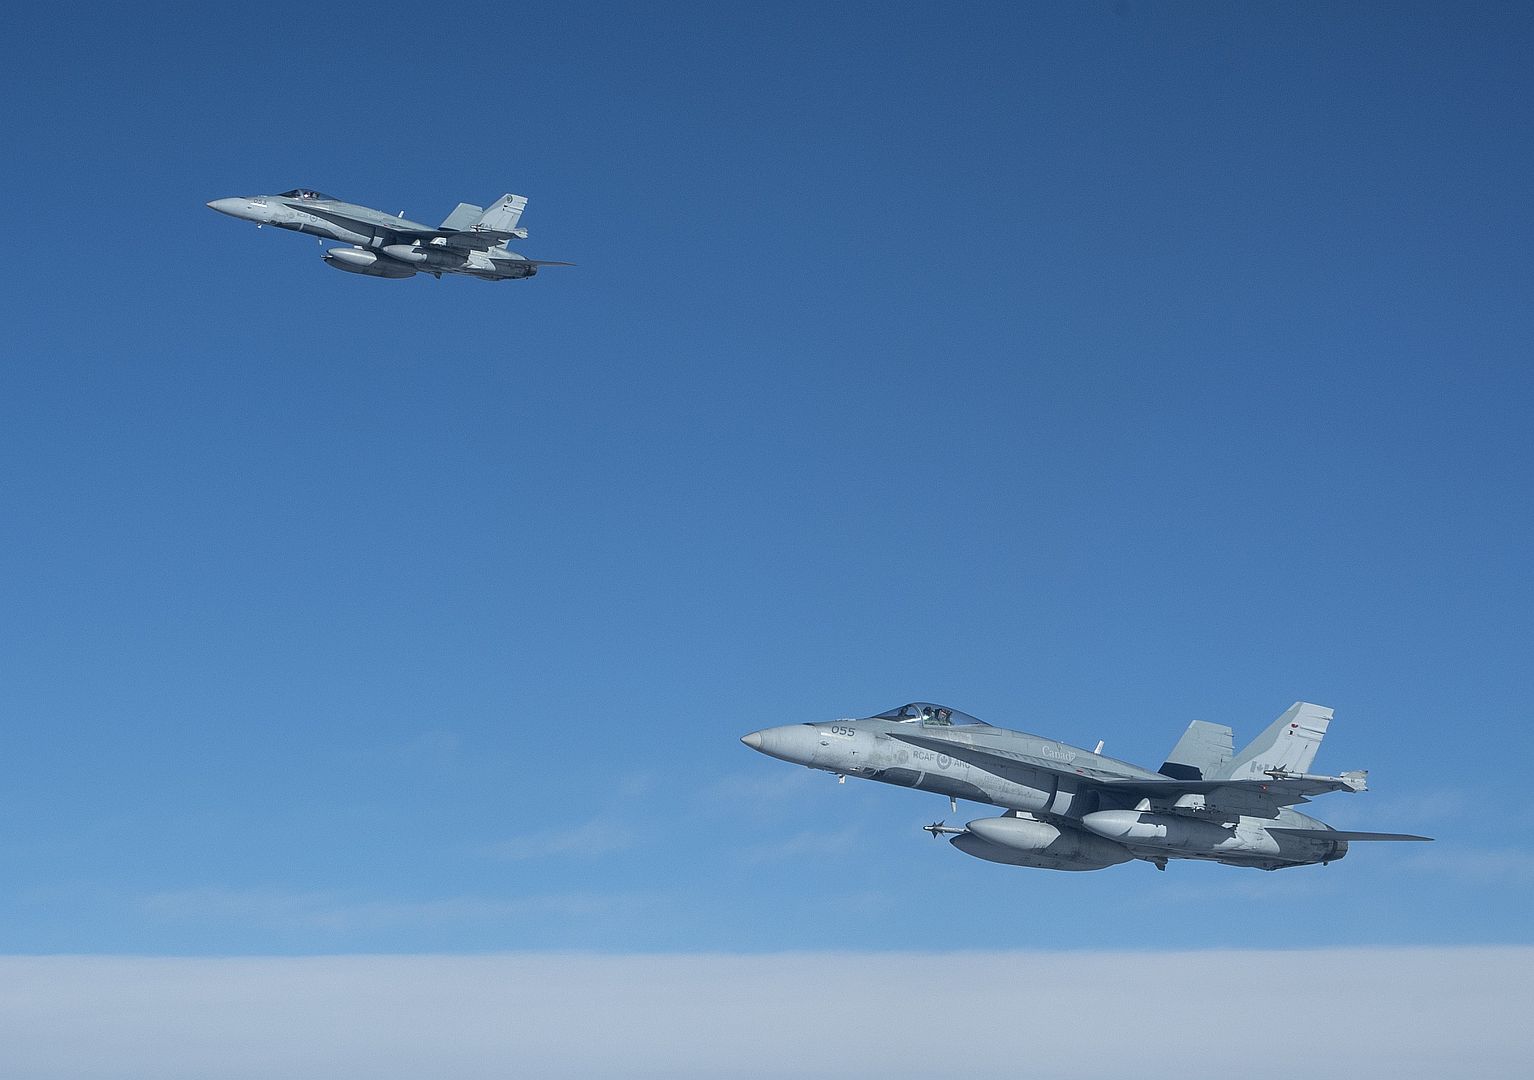 18 Hornet Fighter Jets Take To The Skies En Route To Support Operation NOBLE DEFENDER In Alaska On 12 Oct 2021